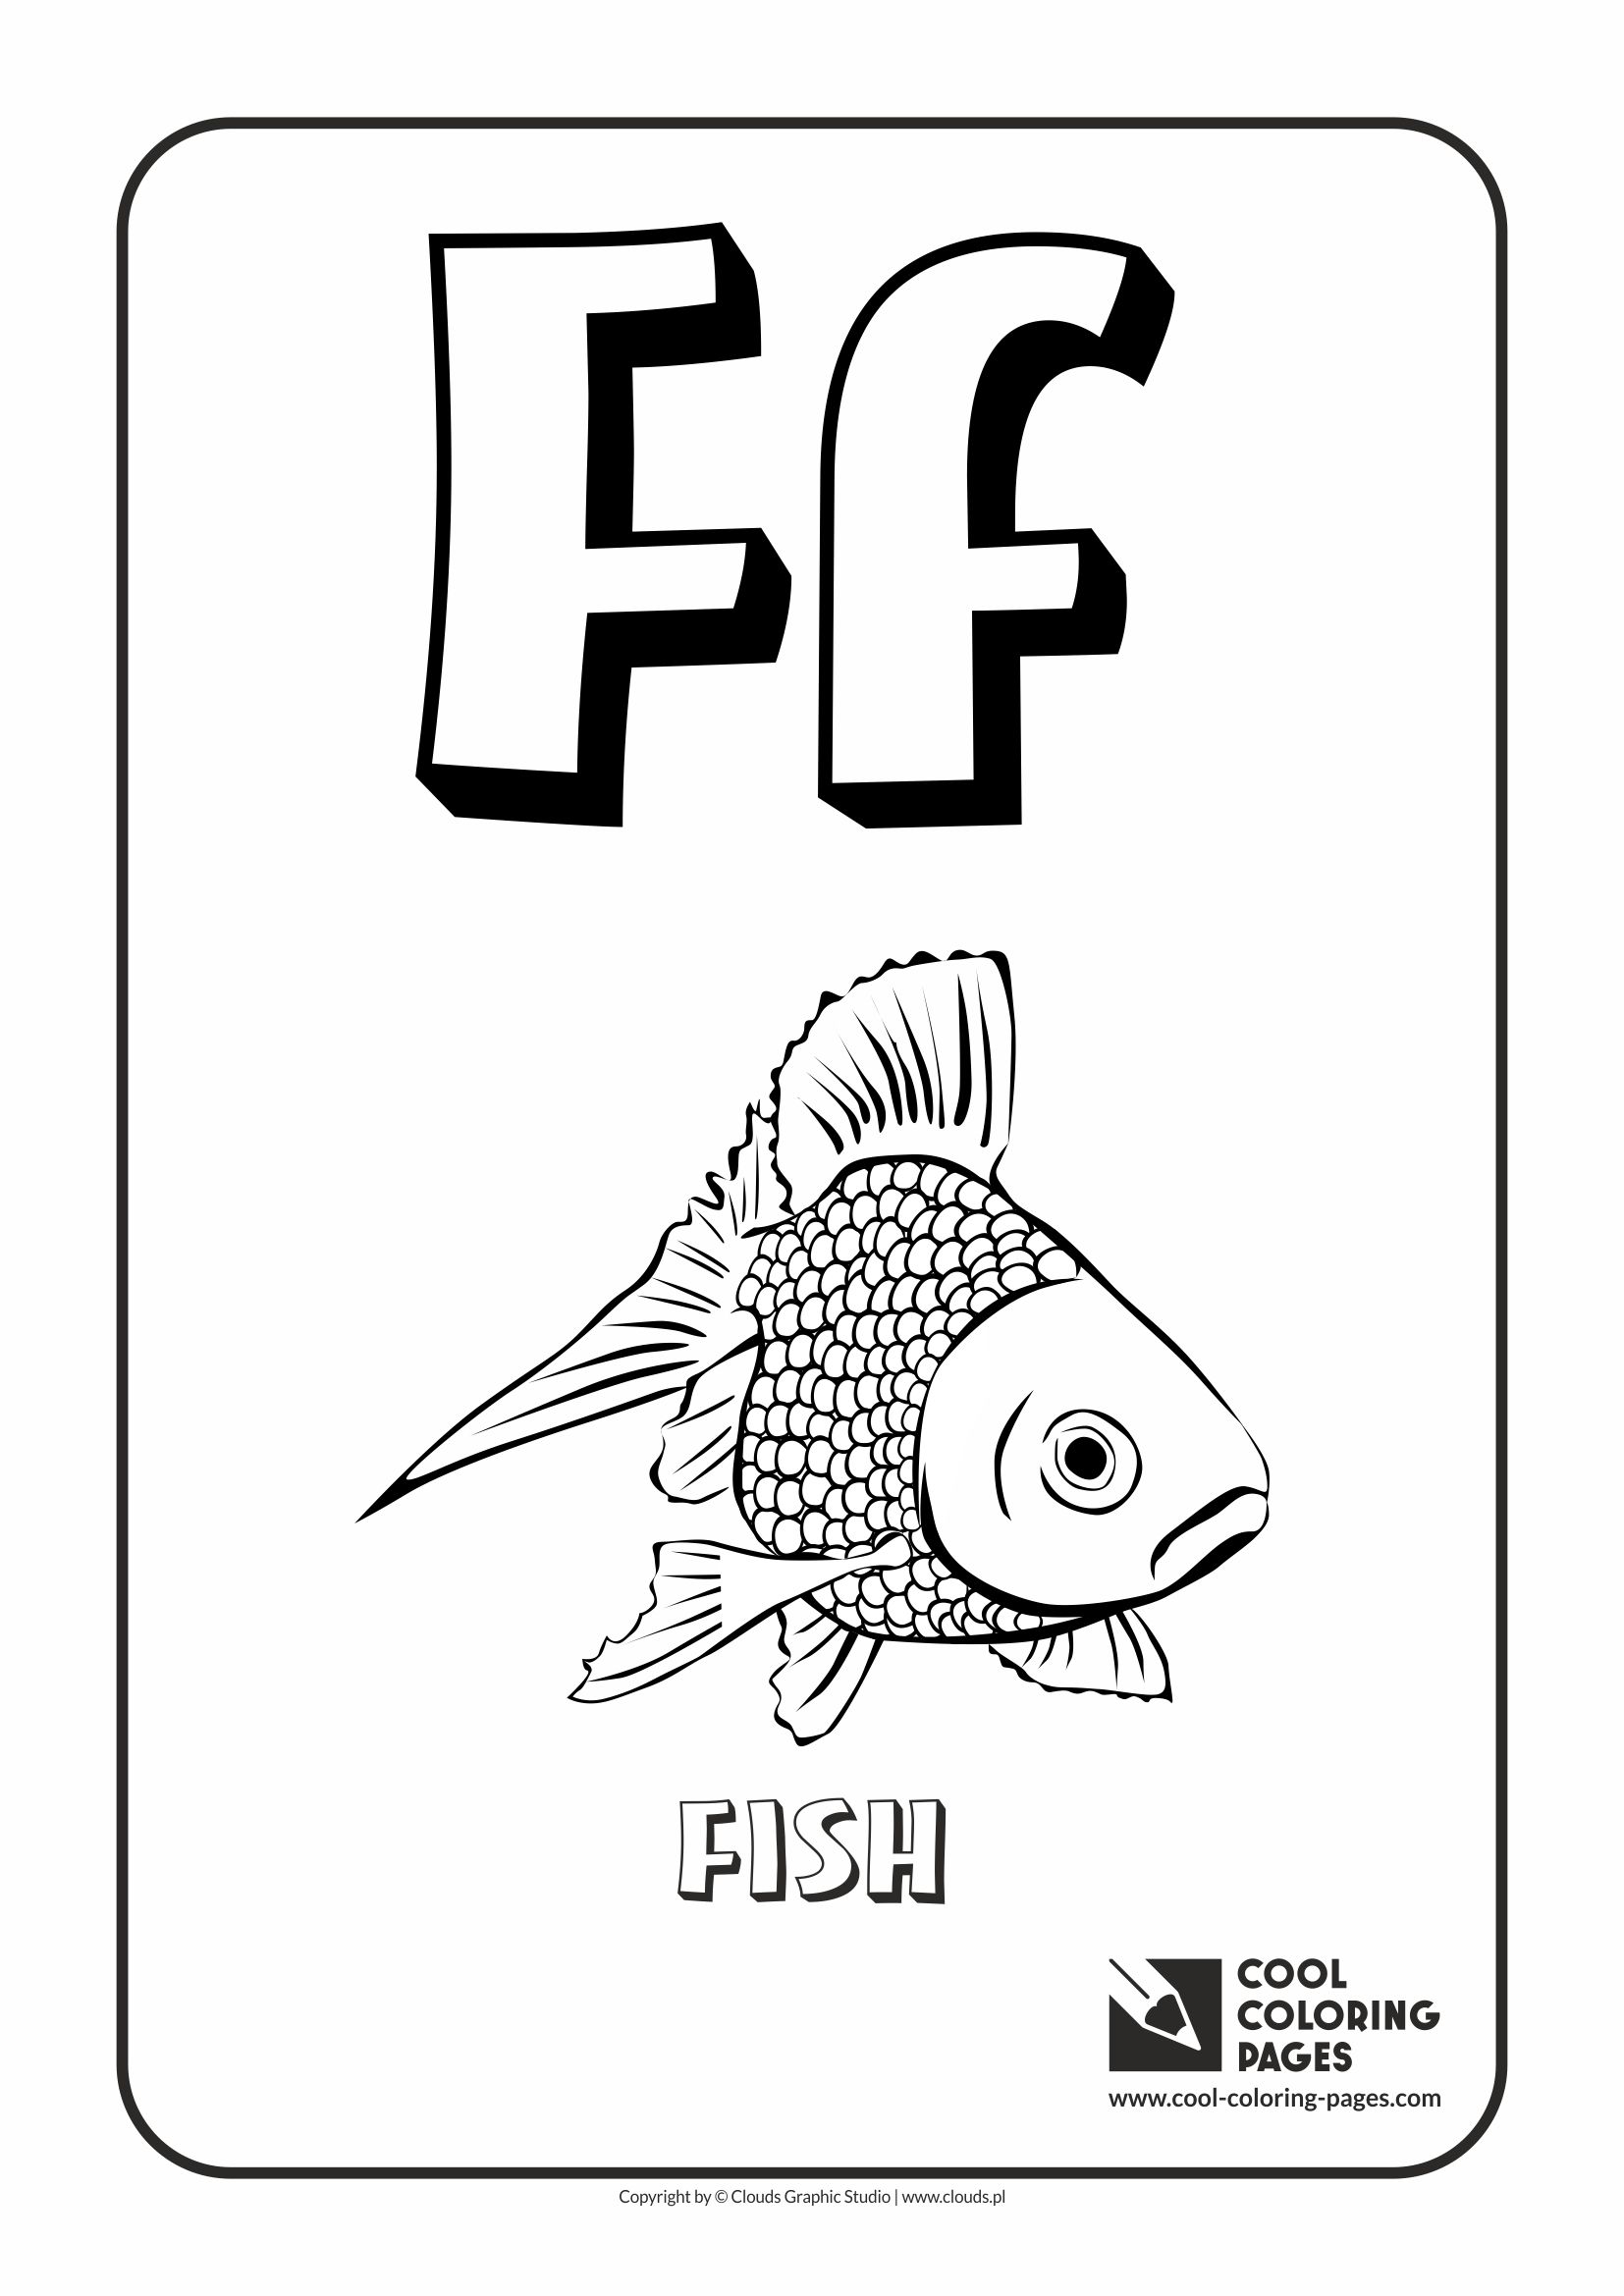 Cool Coloring Pages - Alphabet / Letter F / Coloring page with letter F